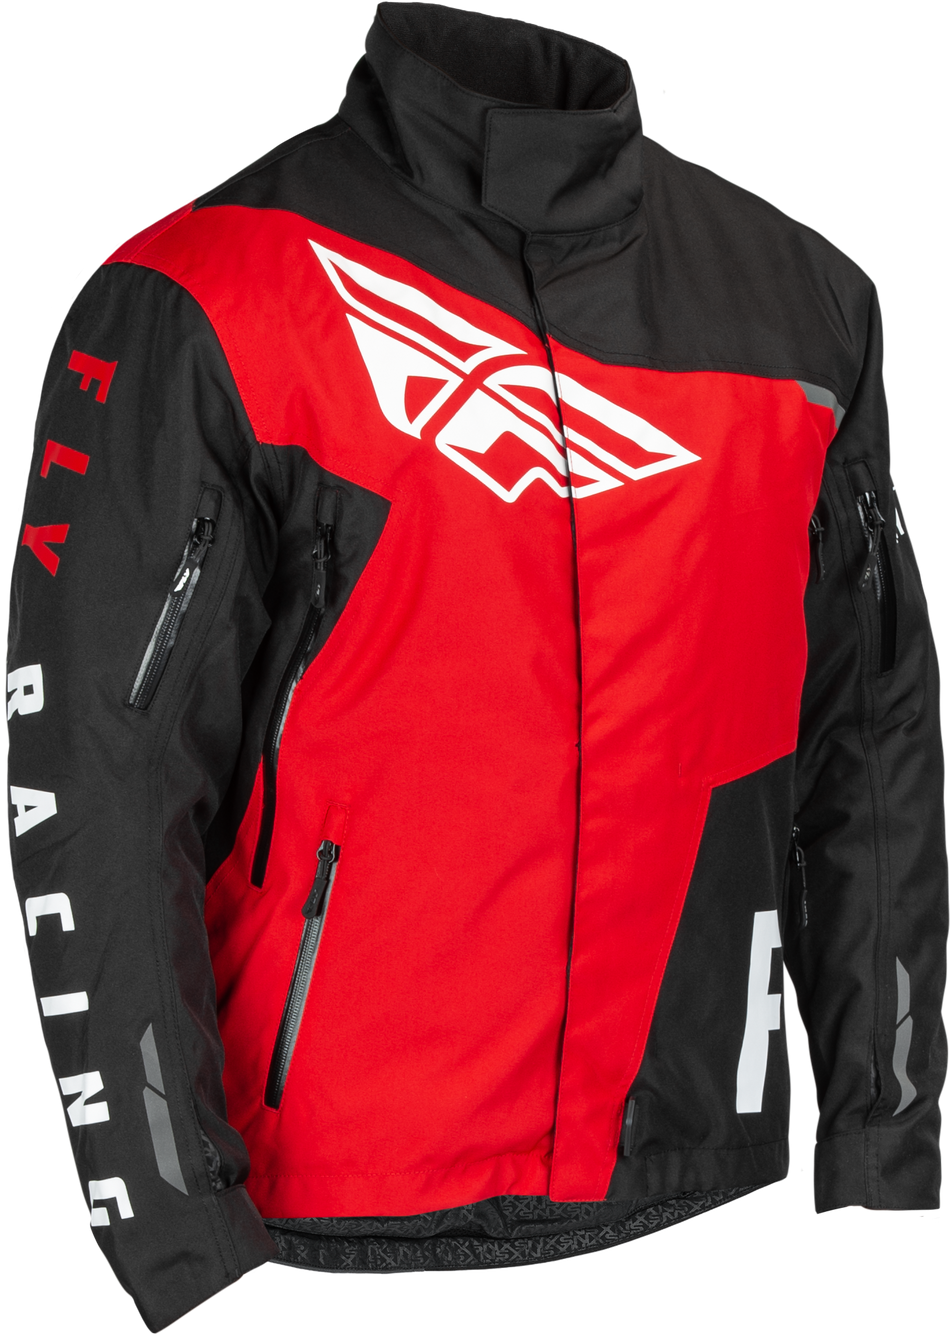 FLY RACING Youth Snx Pro Jacket Black/Red Ym 470-5402YM